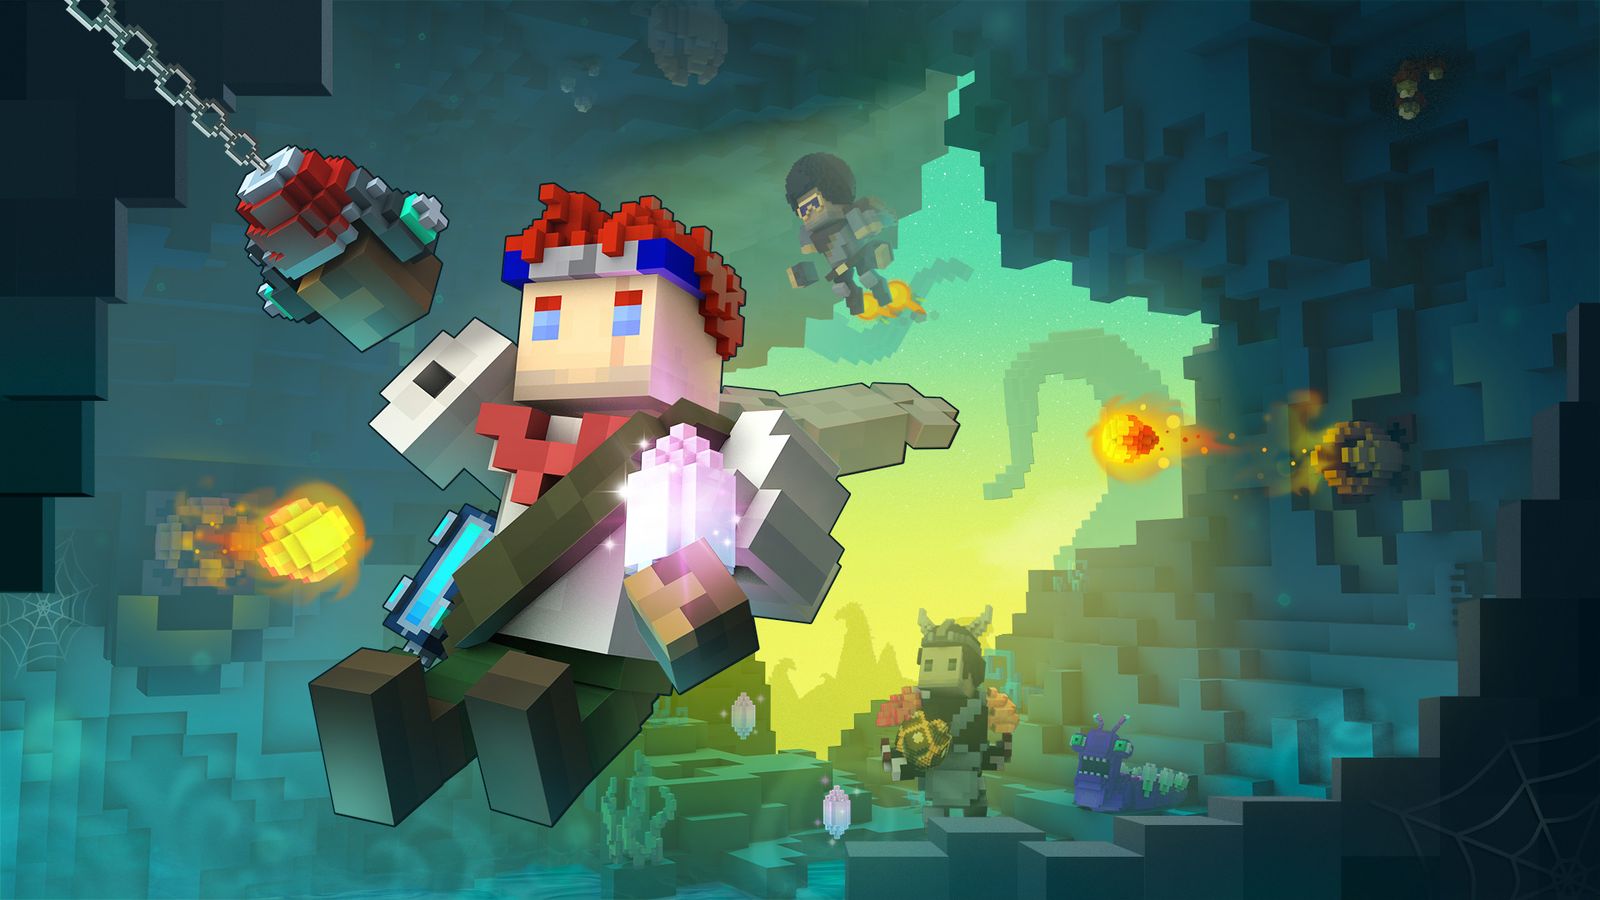 In-game image from Trove of a blocky character with red hair swinging through a cave.